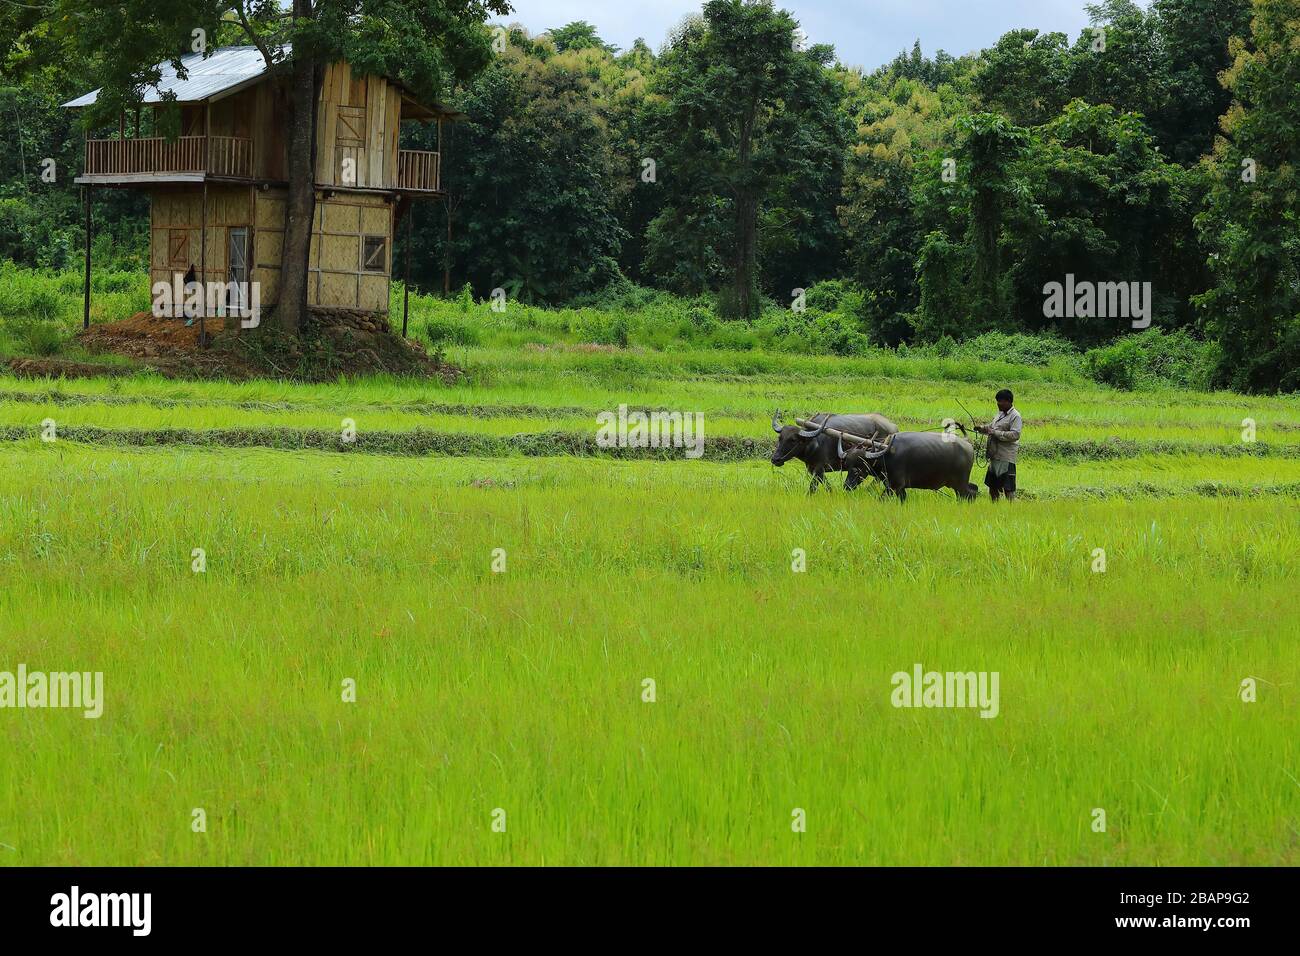 Organic farming practices.Ploughing and flattening of paddy field with oxen in rural India Stock Photo